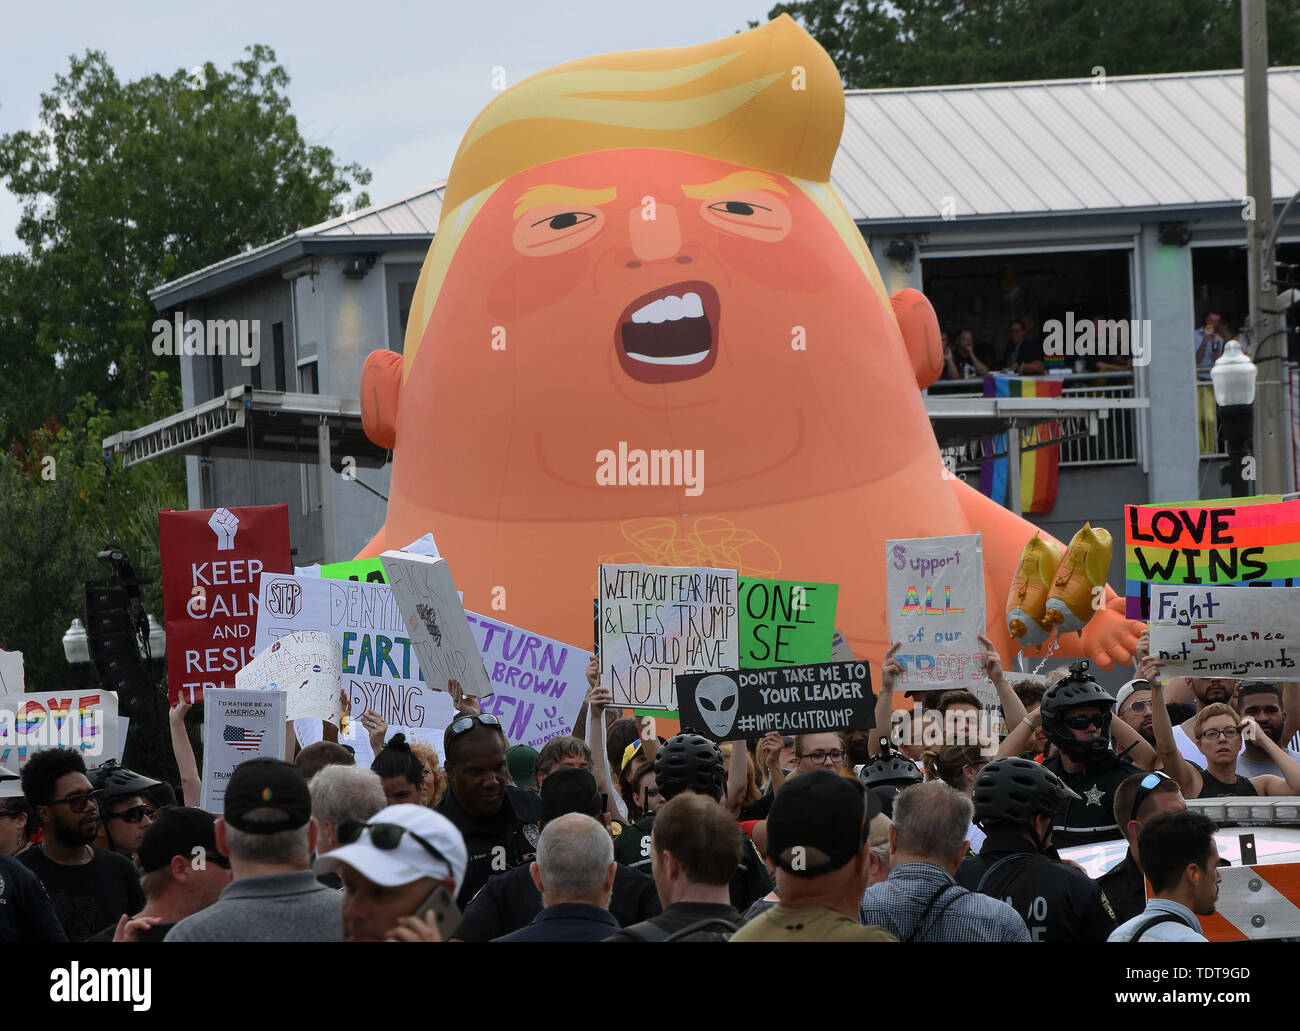 Orlando, Florida, USA. 18th June, 2019. A Baby Trump balloon is inflated at a Trump protest rally near U.S. President Donald Trump's Make America Great Again rally at the Amway Center on June 18, 2019 in Orlando, Florida. This is the kick-off event for Trump's campaign for re-election in 2020. Credit: Paul Hennessy/Alamy Live News Stock Photo